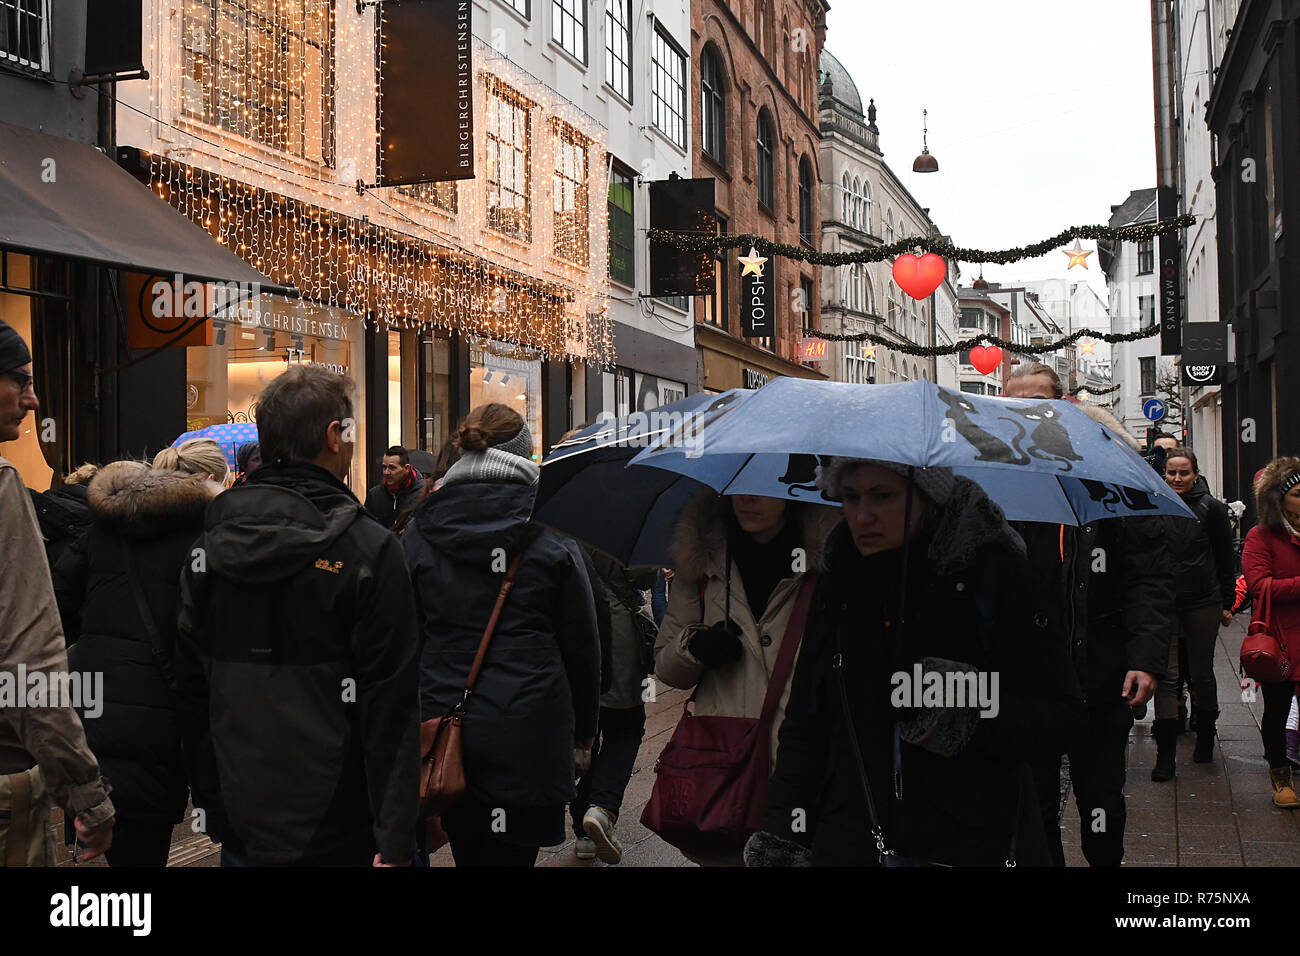 Copenhagen, Denmark. 8th December 2018.Christmas shoppers on Saturday on  famous street Kobemagergade and Stroget in Danish capital. Credit: Francis  Joseph Dean / Deanpictures/Alamy Live News Stock Photo - Alamy